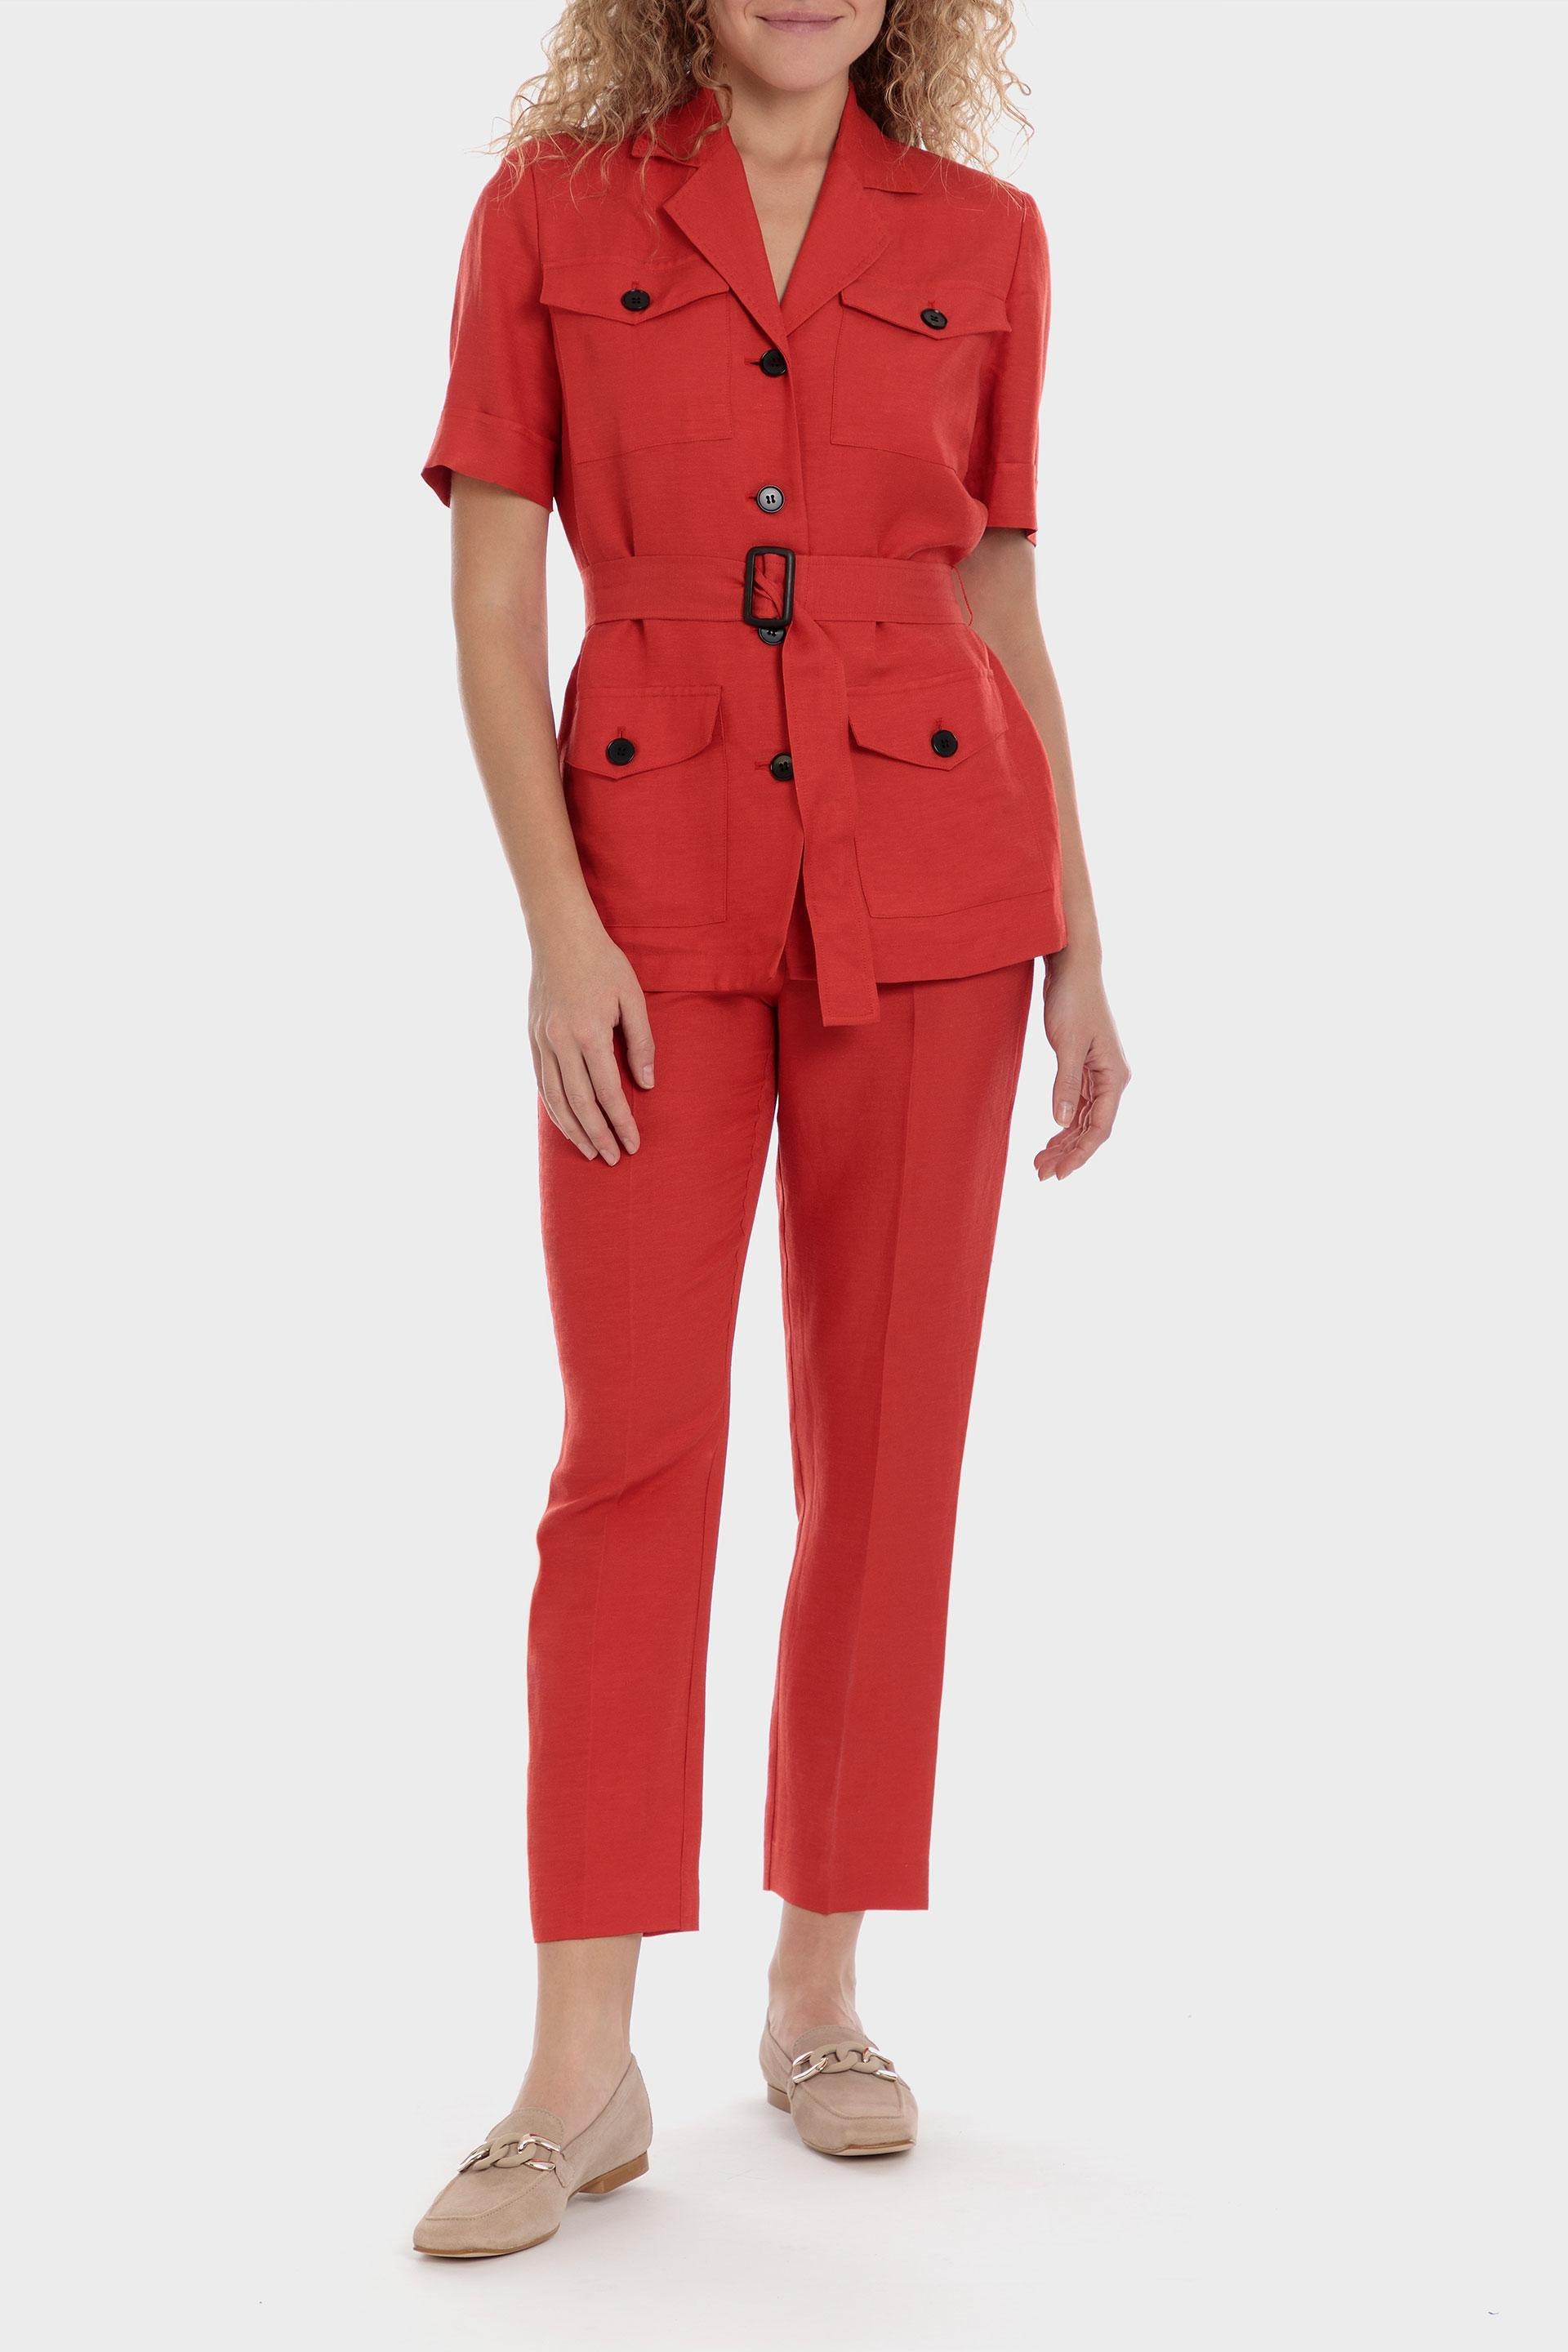 Punt Roma - Red Jacket With Pockets